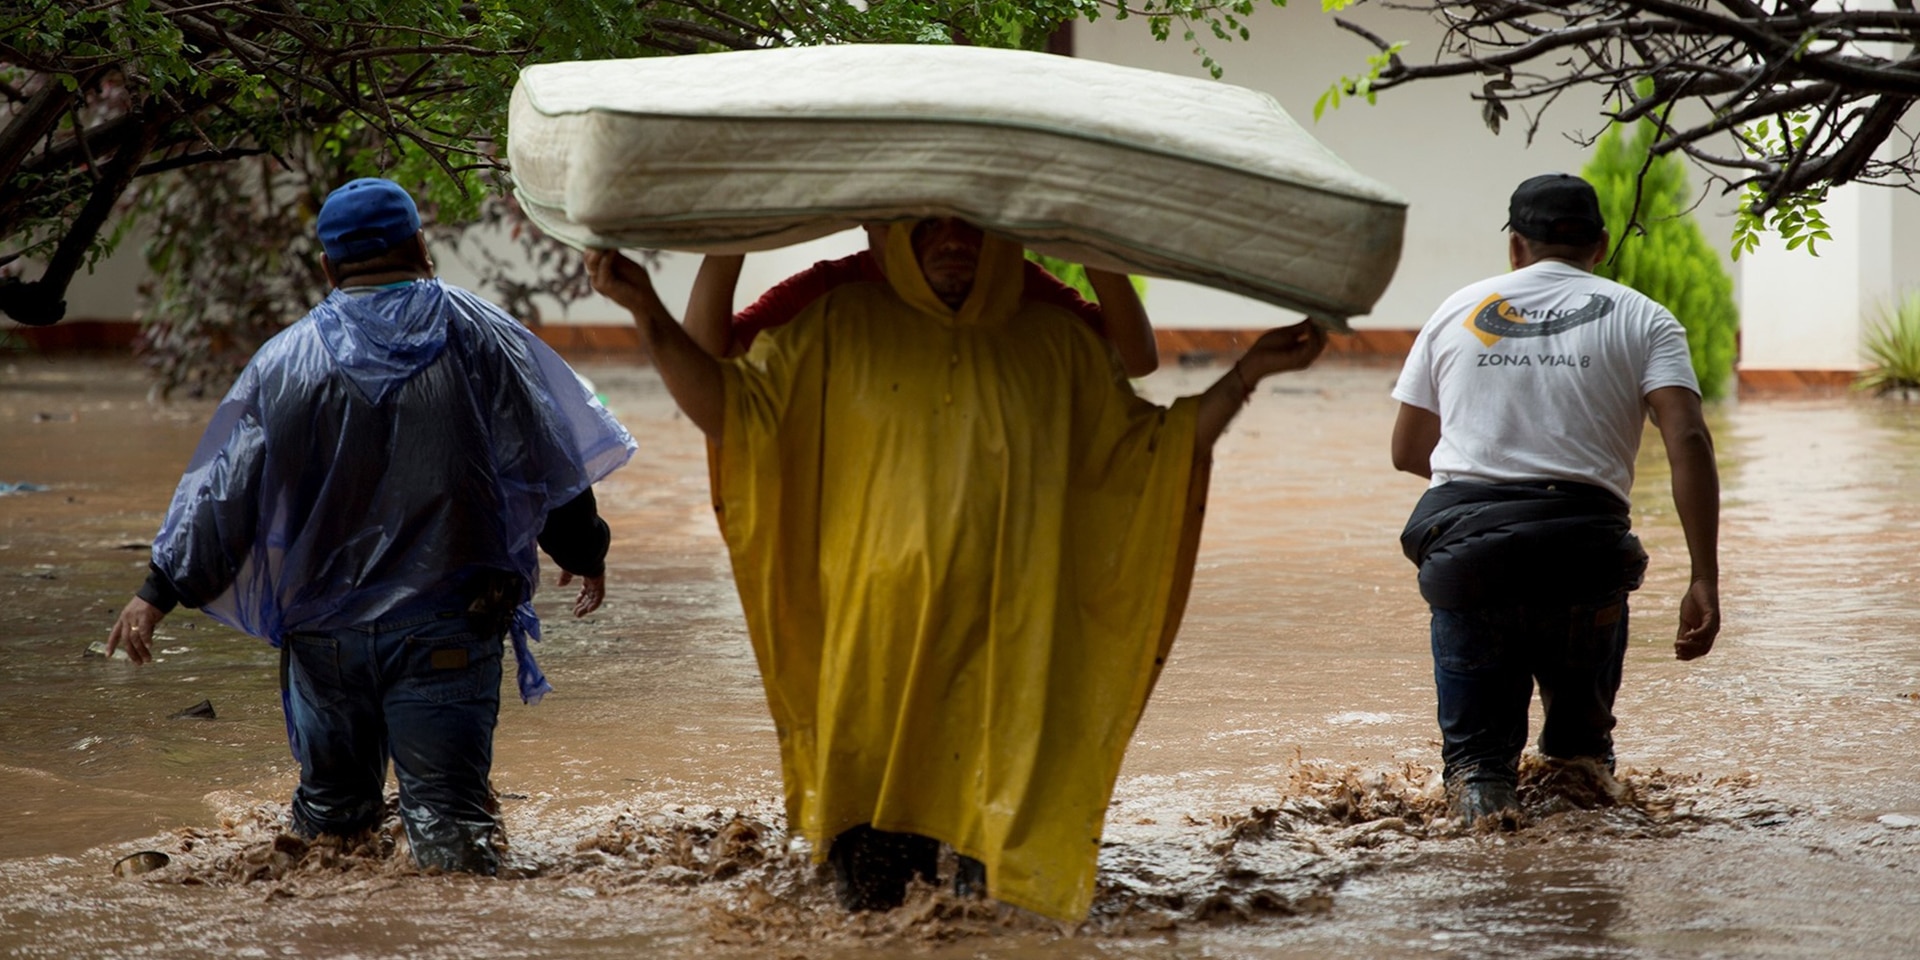 Two people carrying a mattress through the floods, accompanied by two aid workers. 